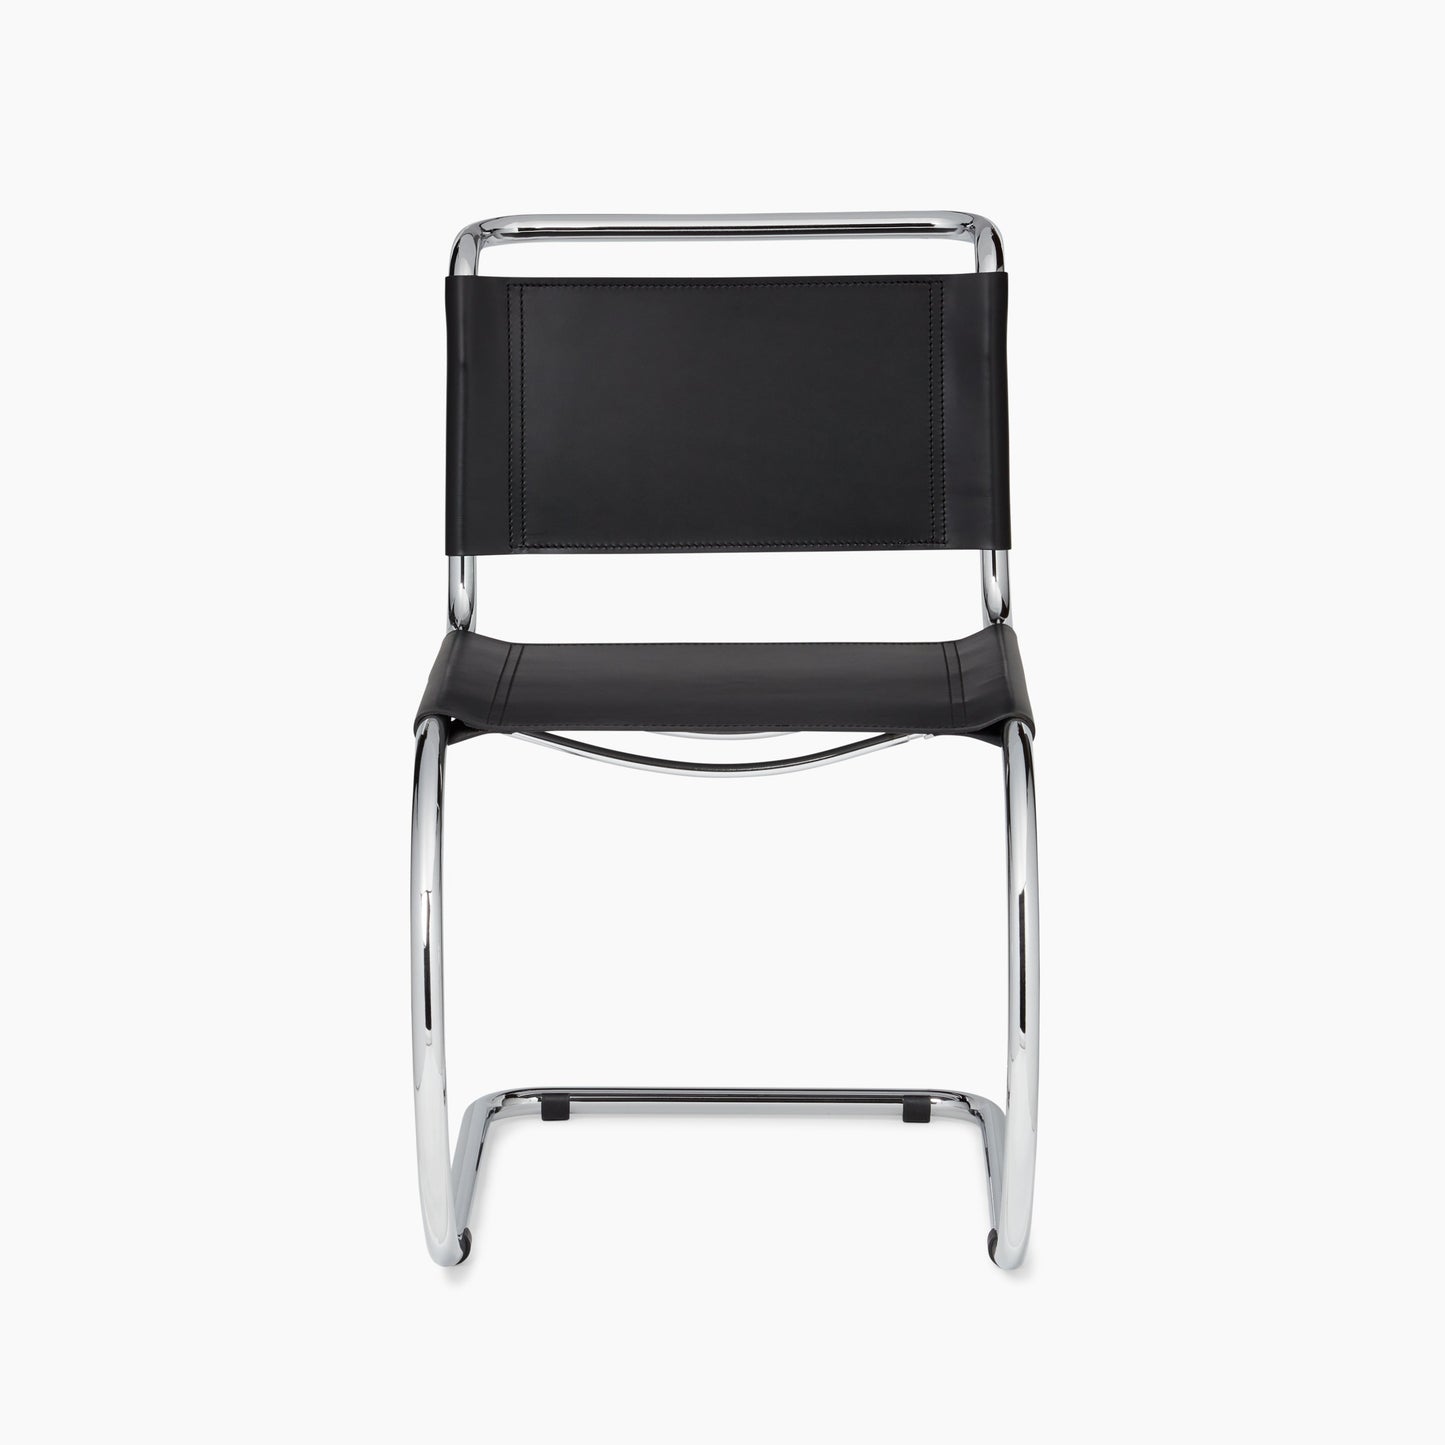 Mies Cantilever Chair